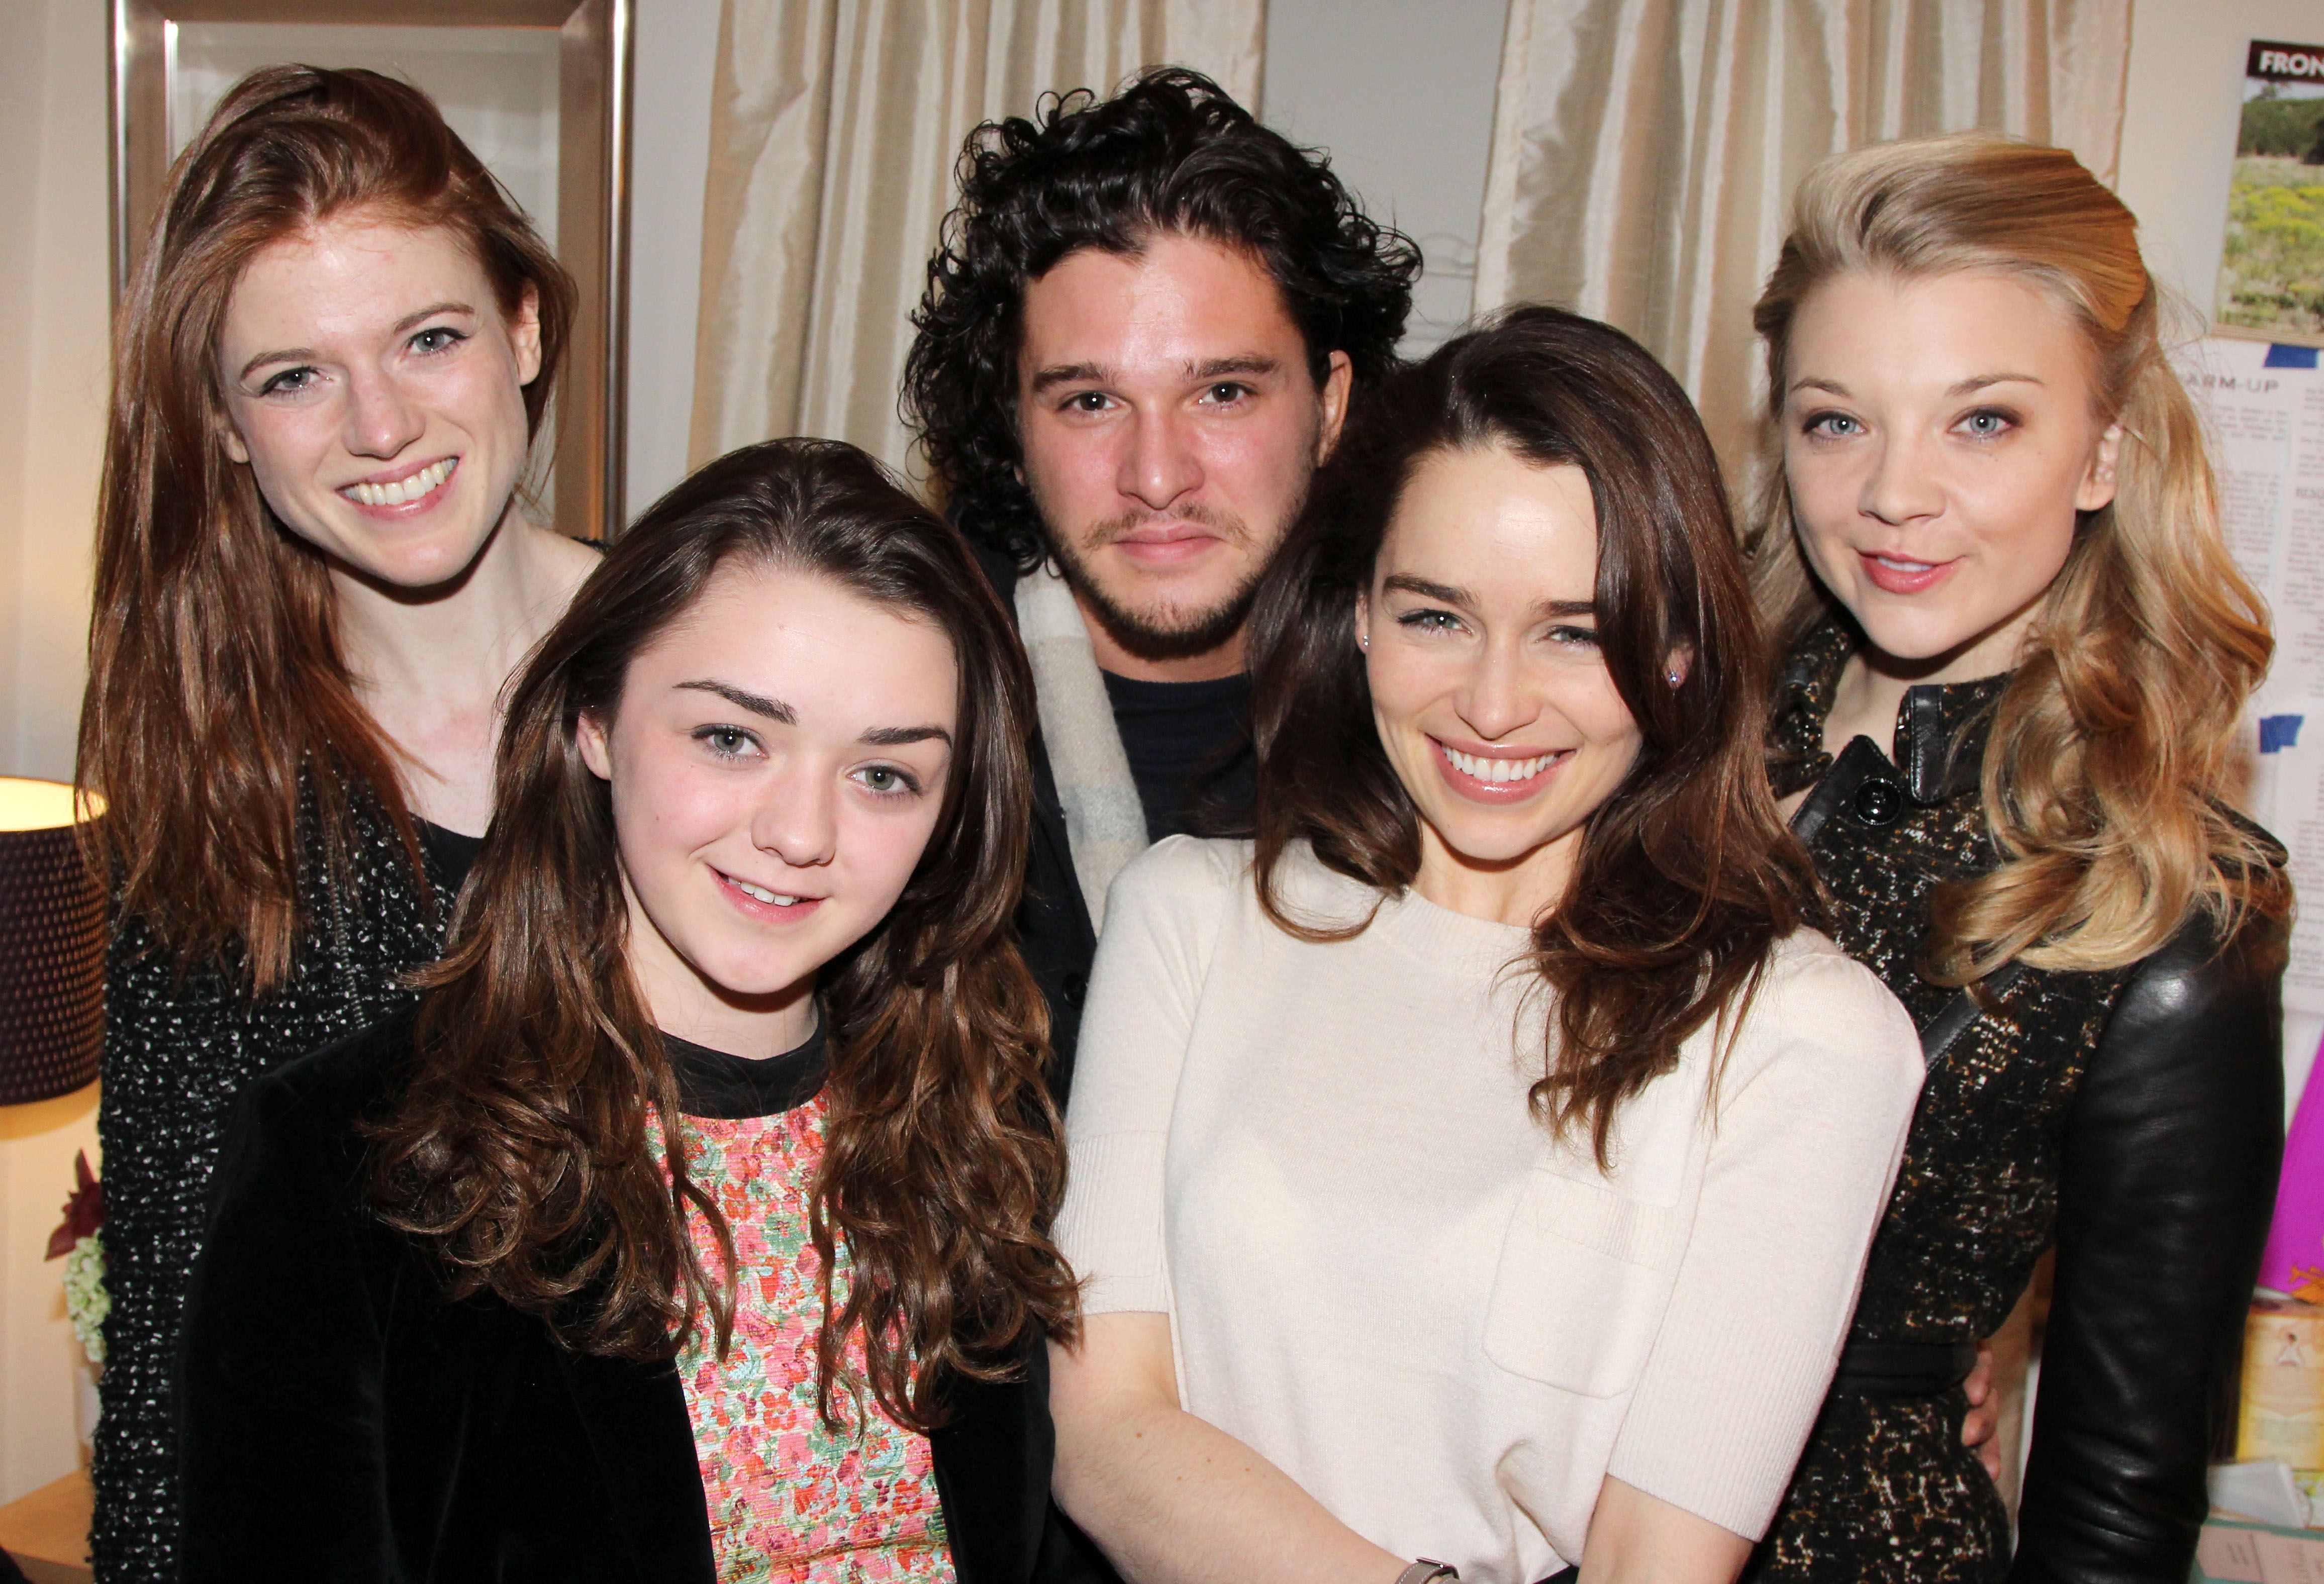 What's Next for 'Game of Thrones' Cast Members